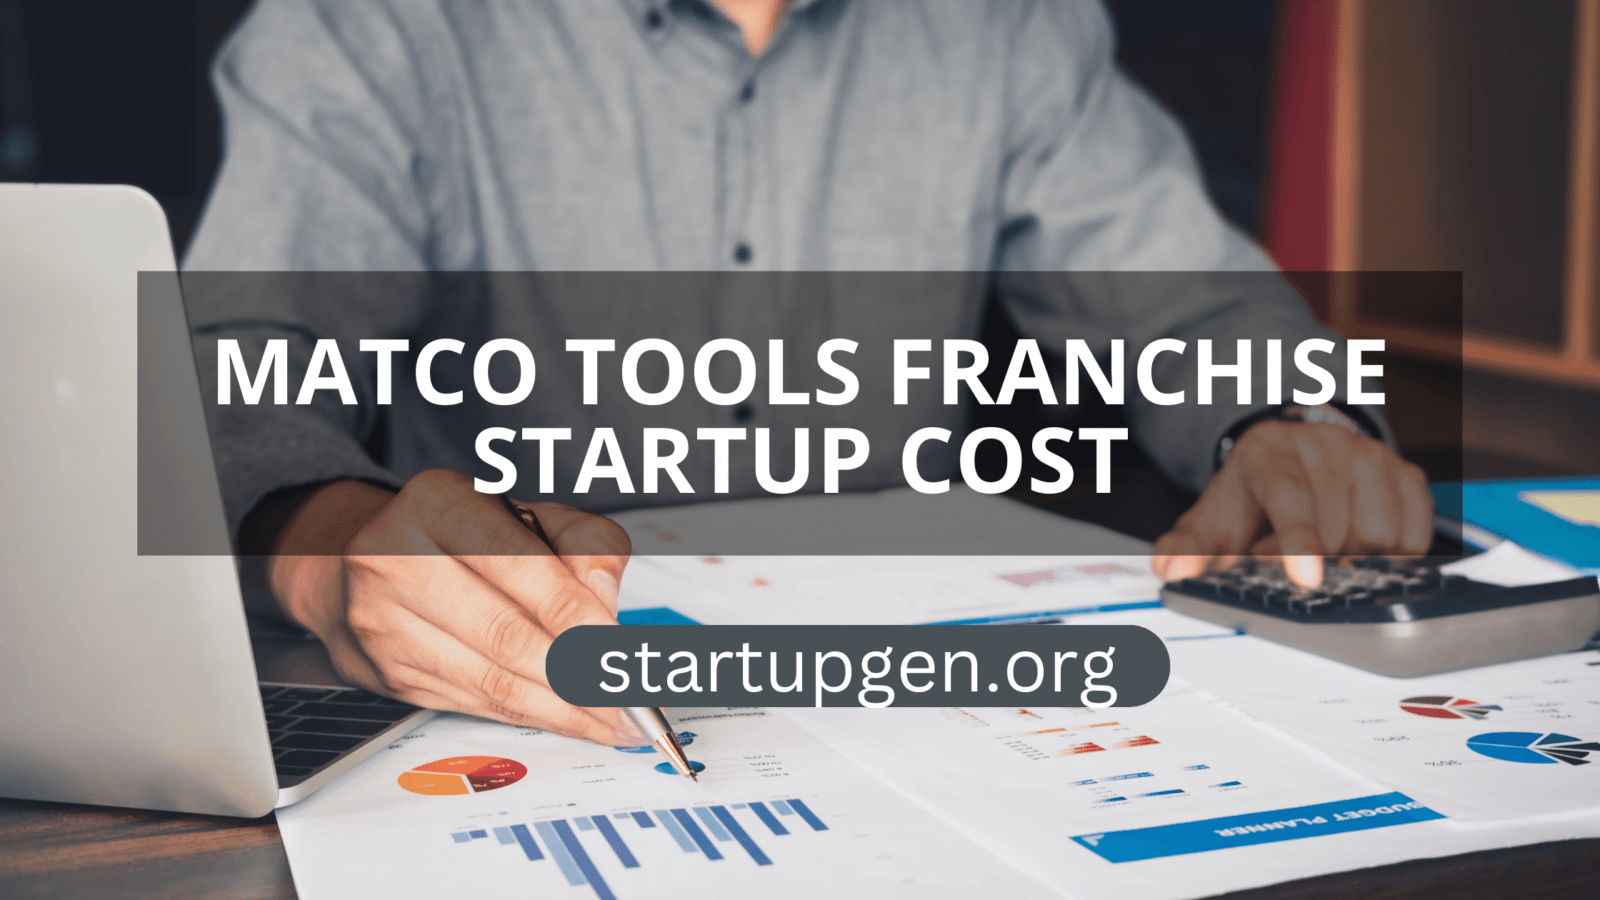 Matco Tools Franchise Startup Cost: From Risk To Reward